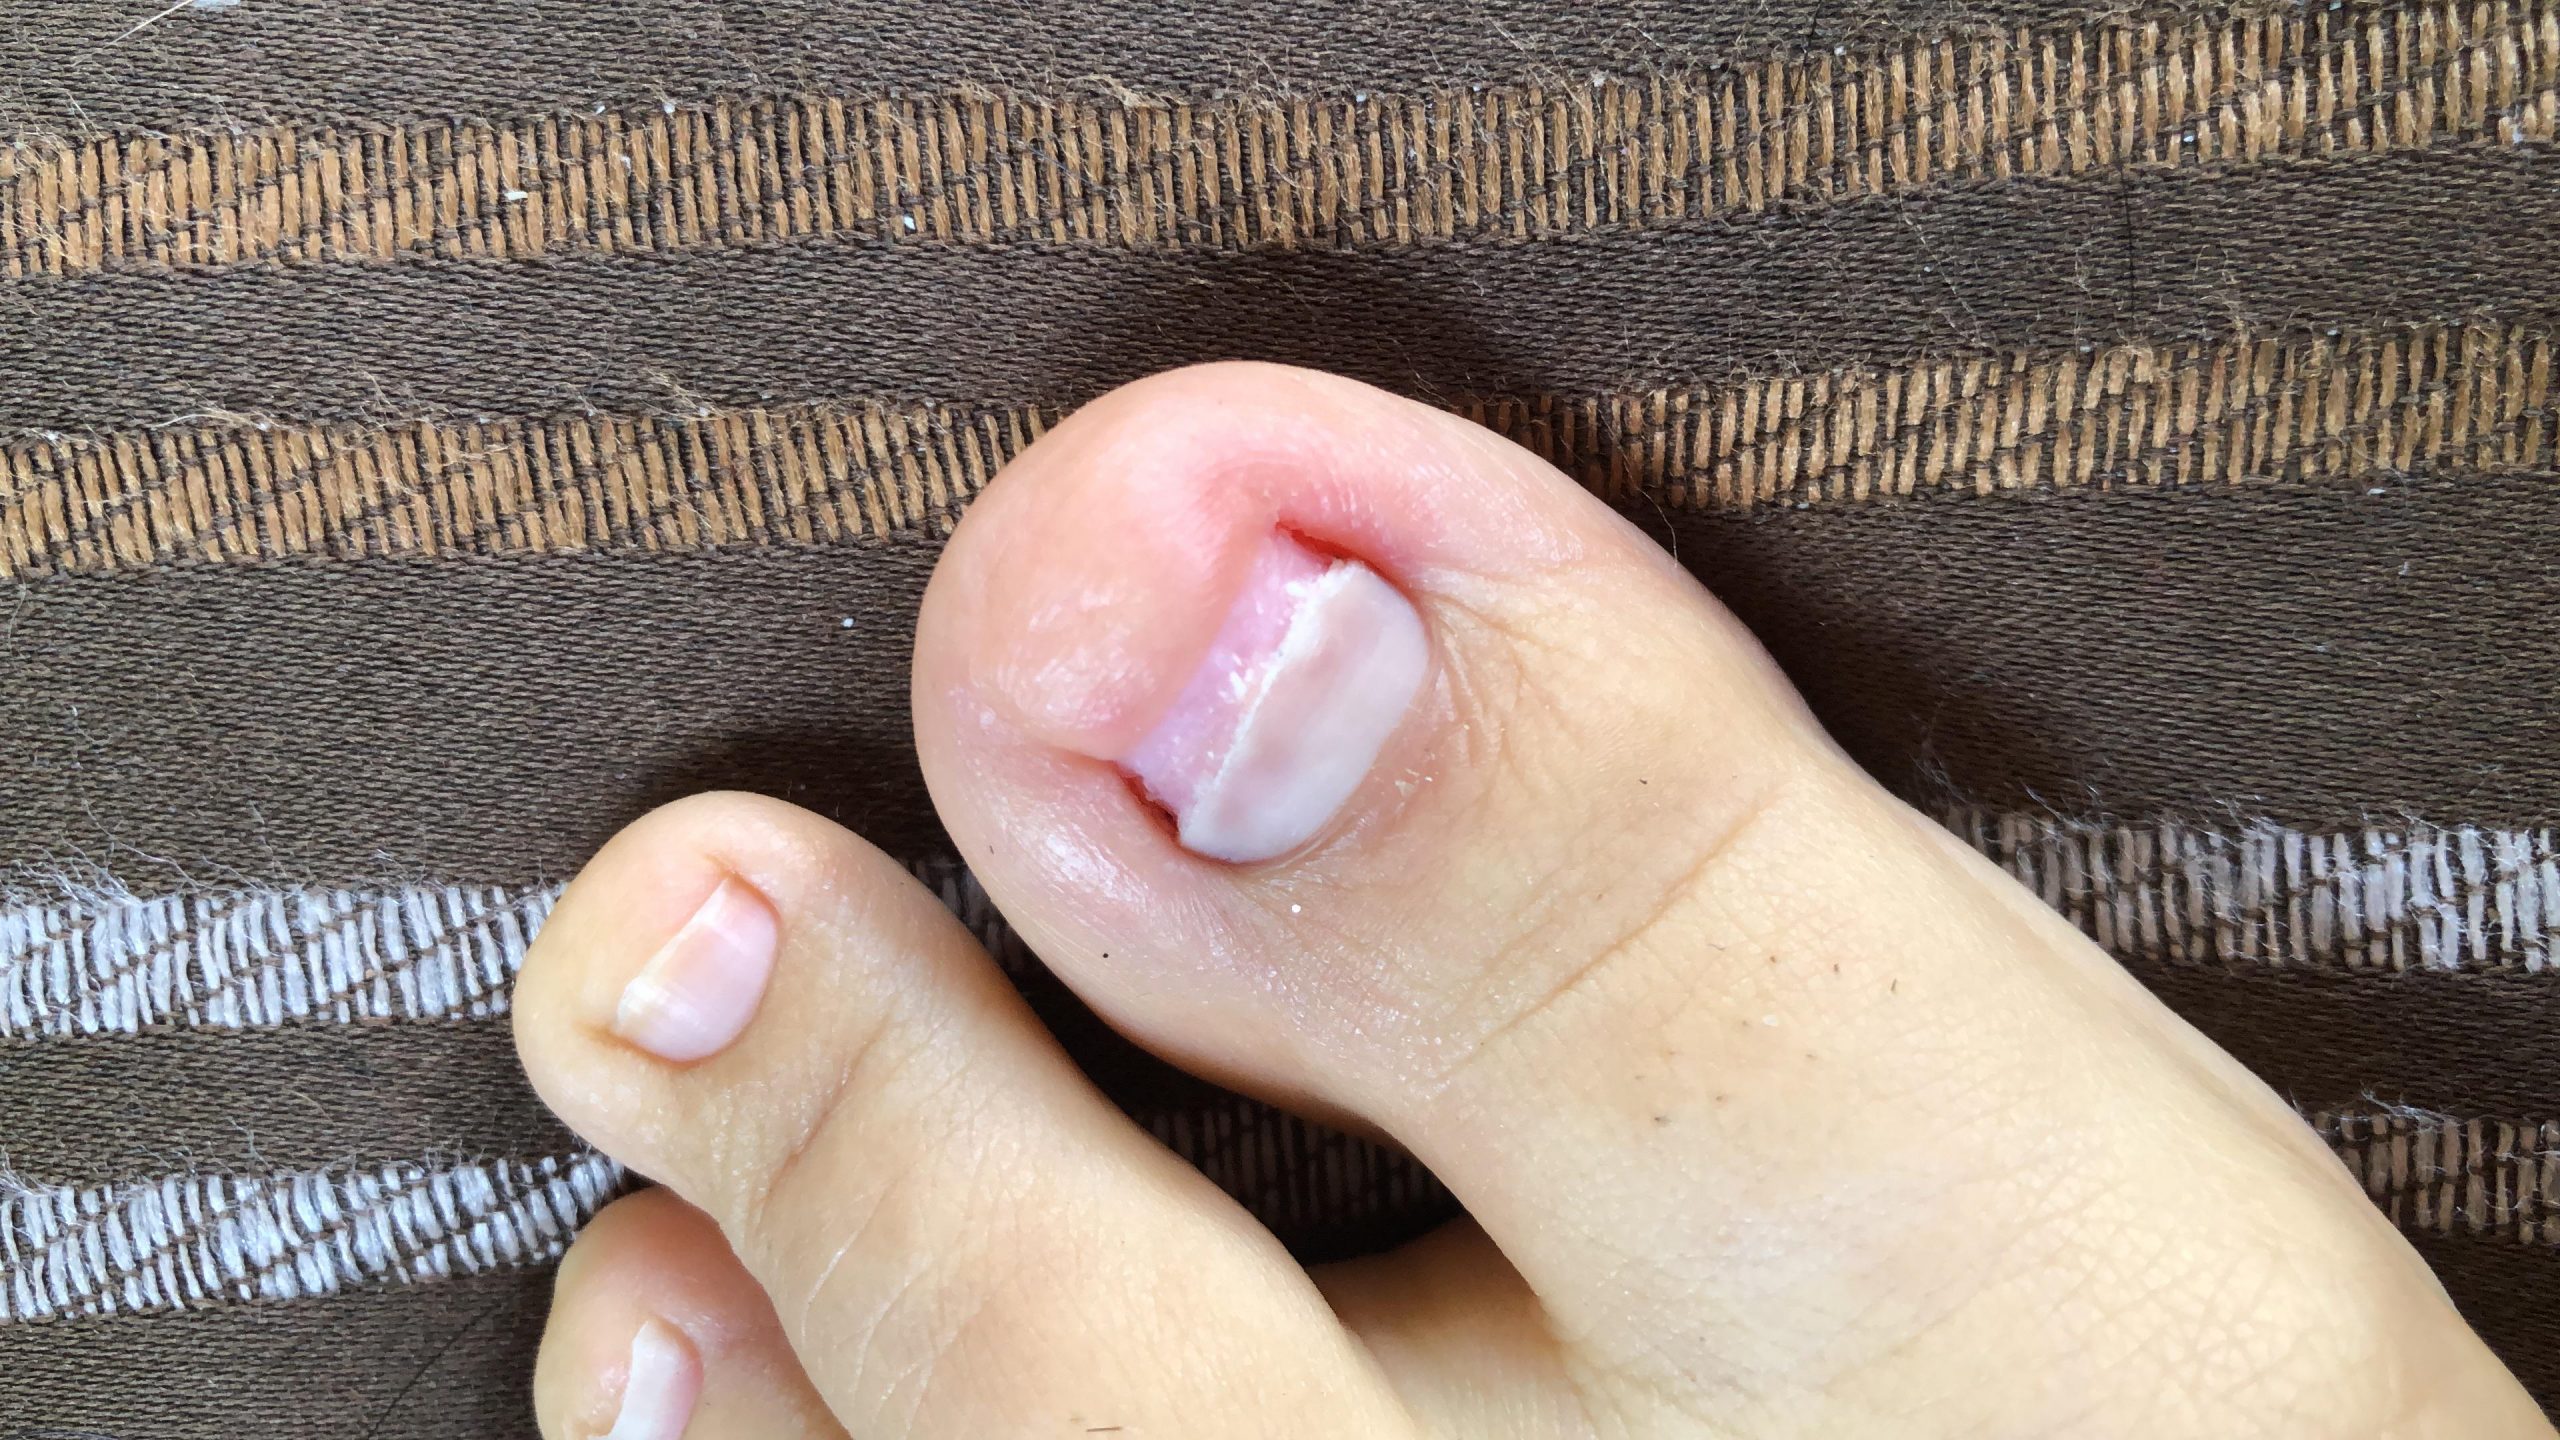 Is this toenail fungus? Every time I let my nail grow out ...